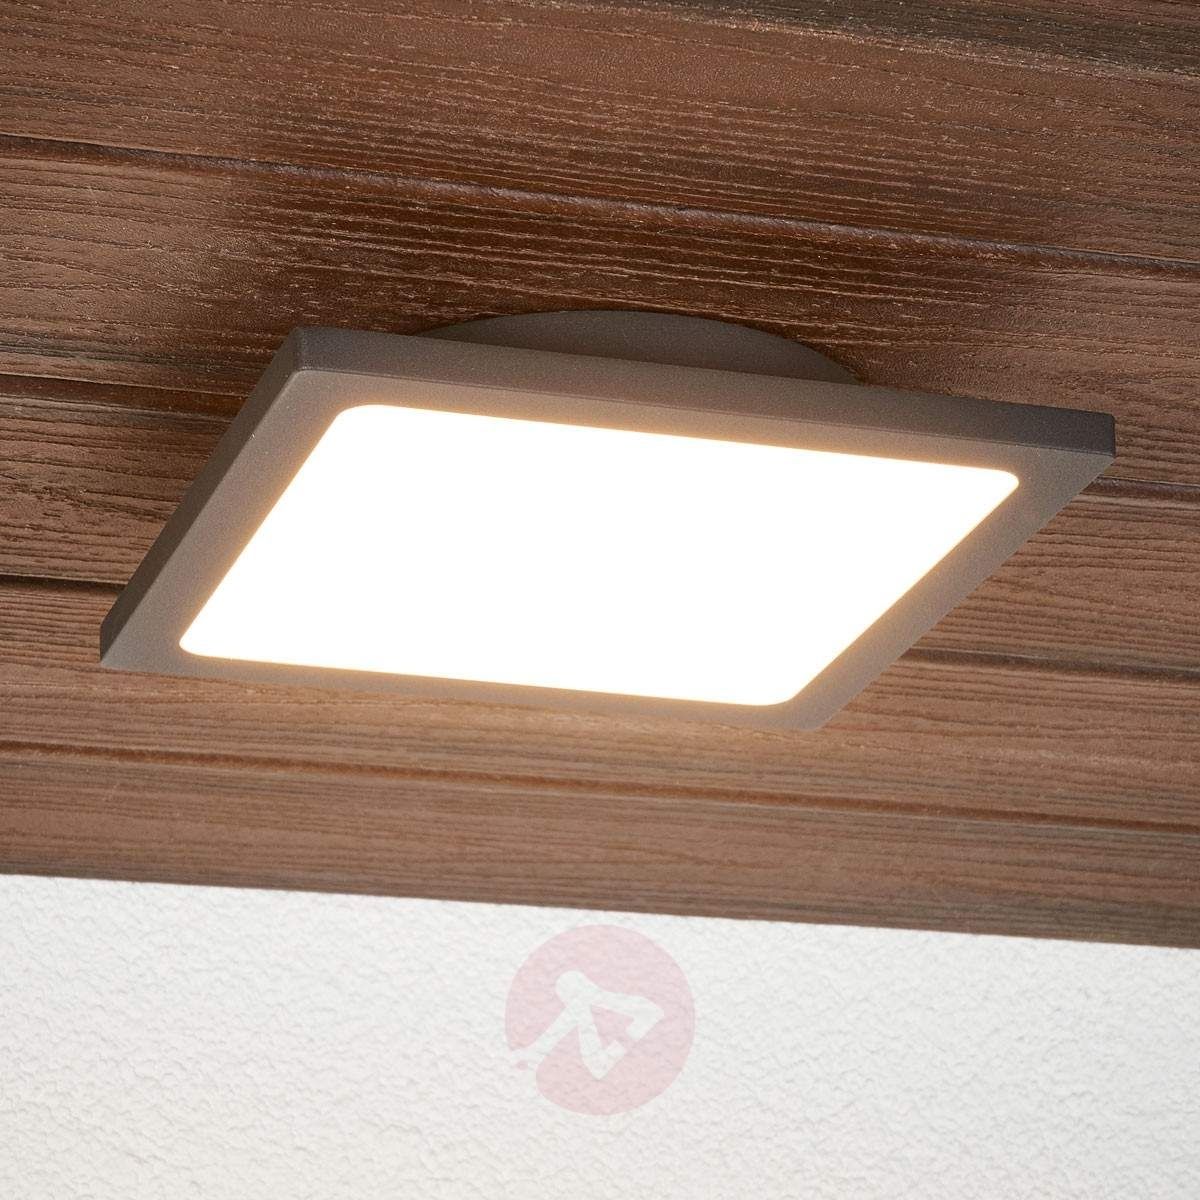 Mabella Led Outdoor Ceiling Lamp With Sensor | Lights (View 12 of 15)